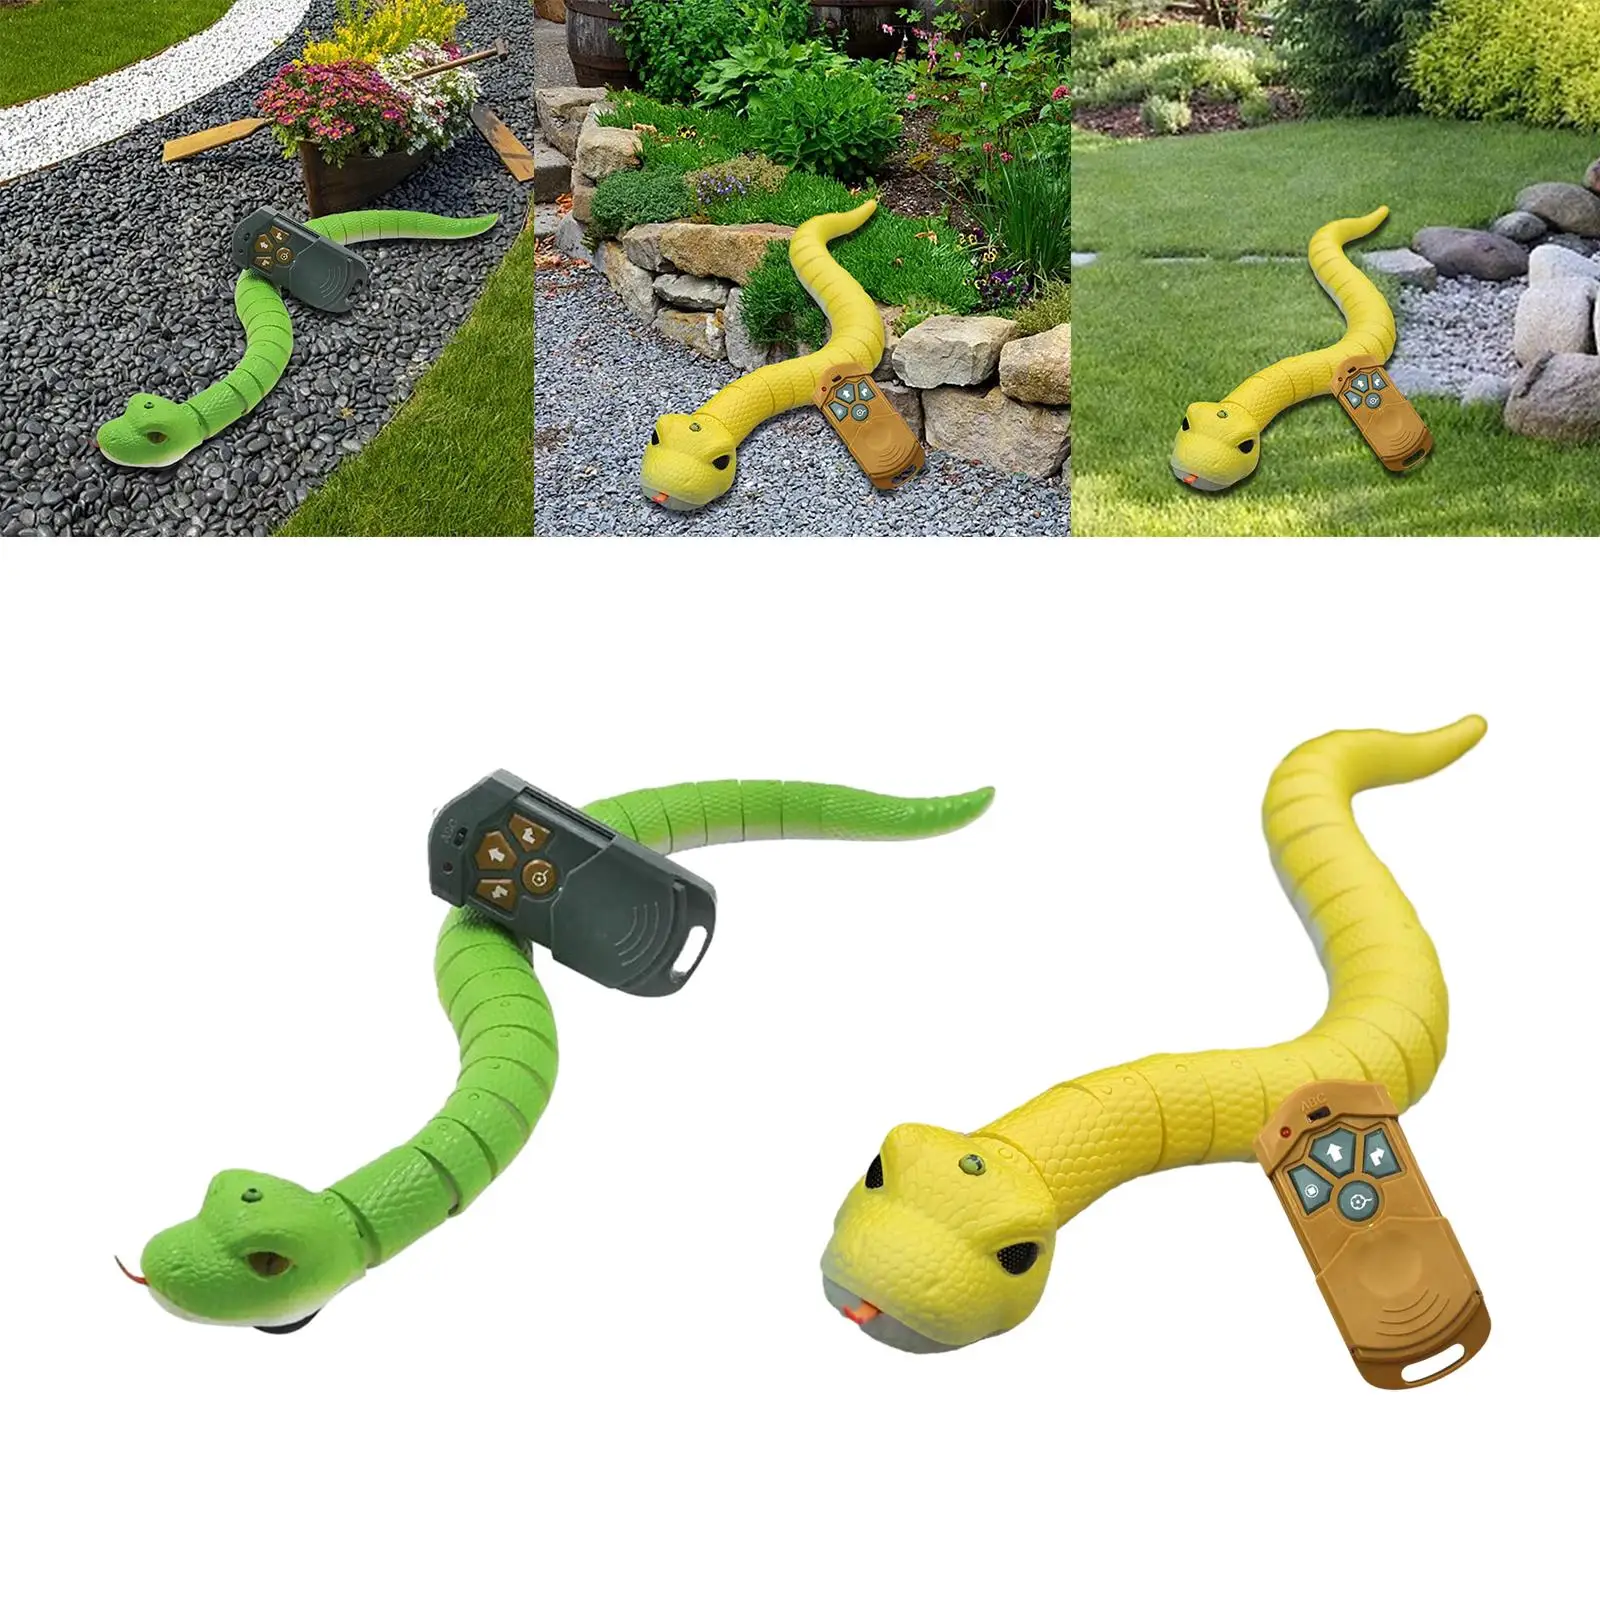 RC Snack Toy Scary Tricks Rechargeable Electric Snake Toy for Boys Gift Kids Toys Stage Props April Fools` Day Interactive Toys